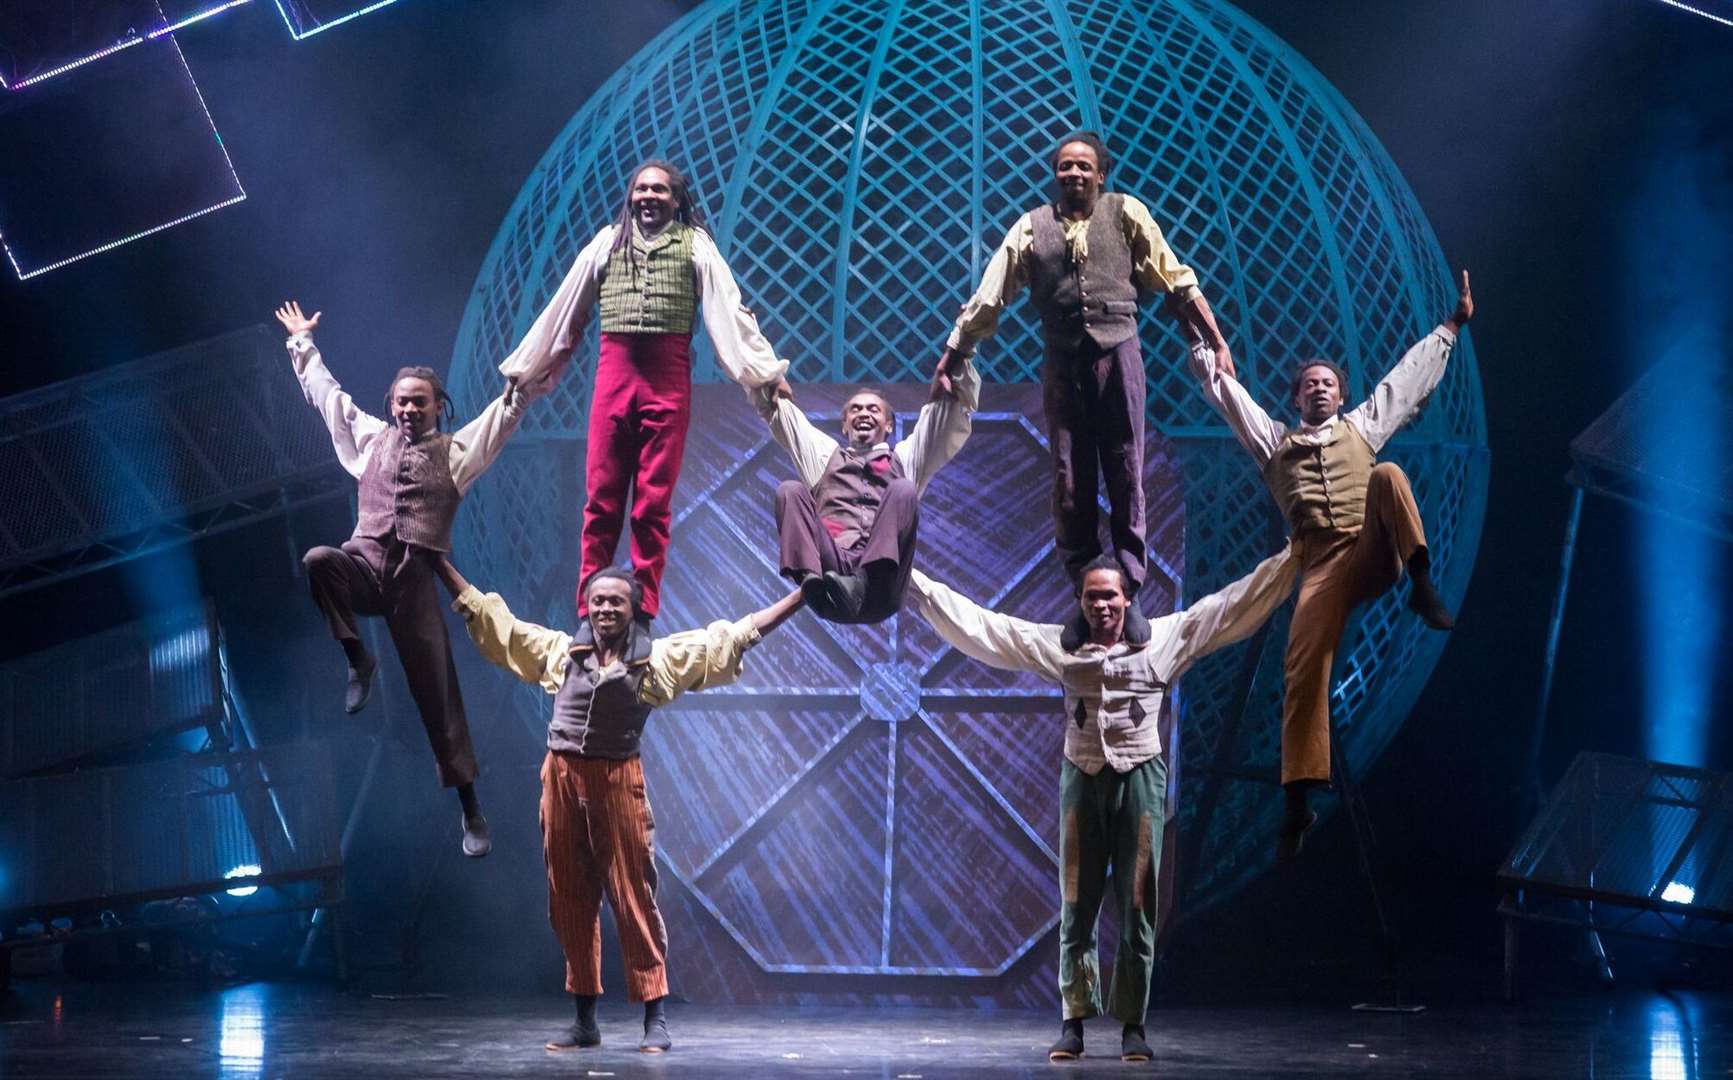 Cirque Berserk! includes a range of stunts and shows, including the death-defying Globe of Death